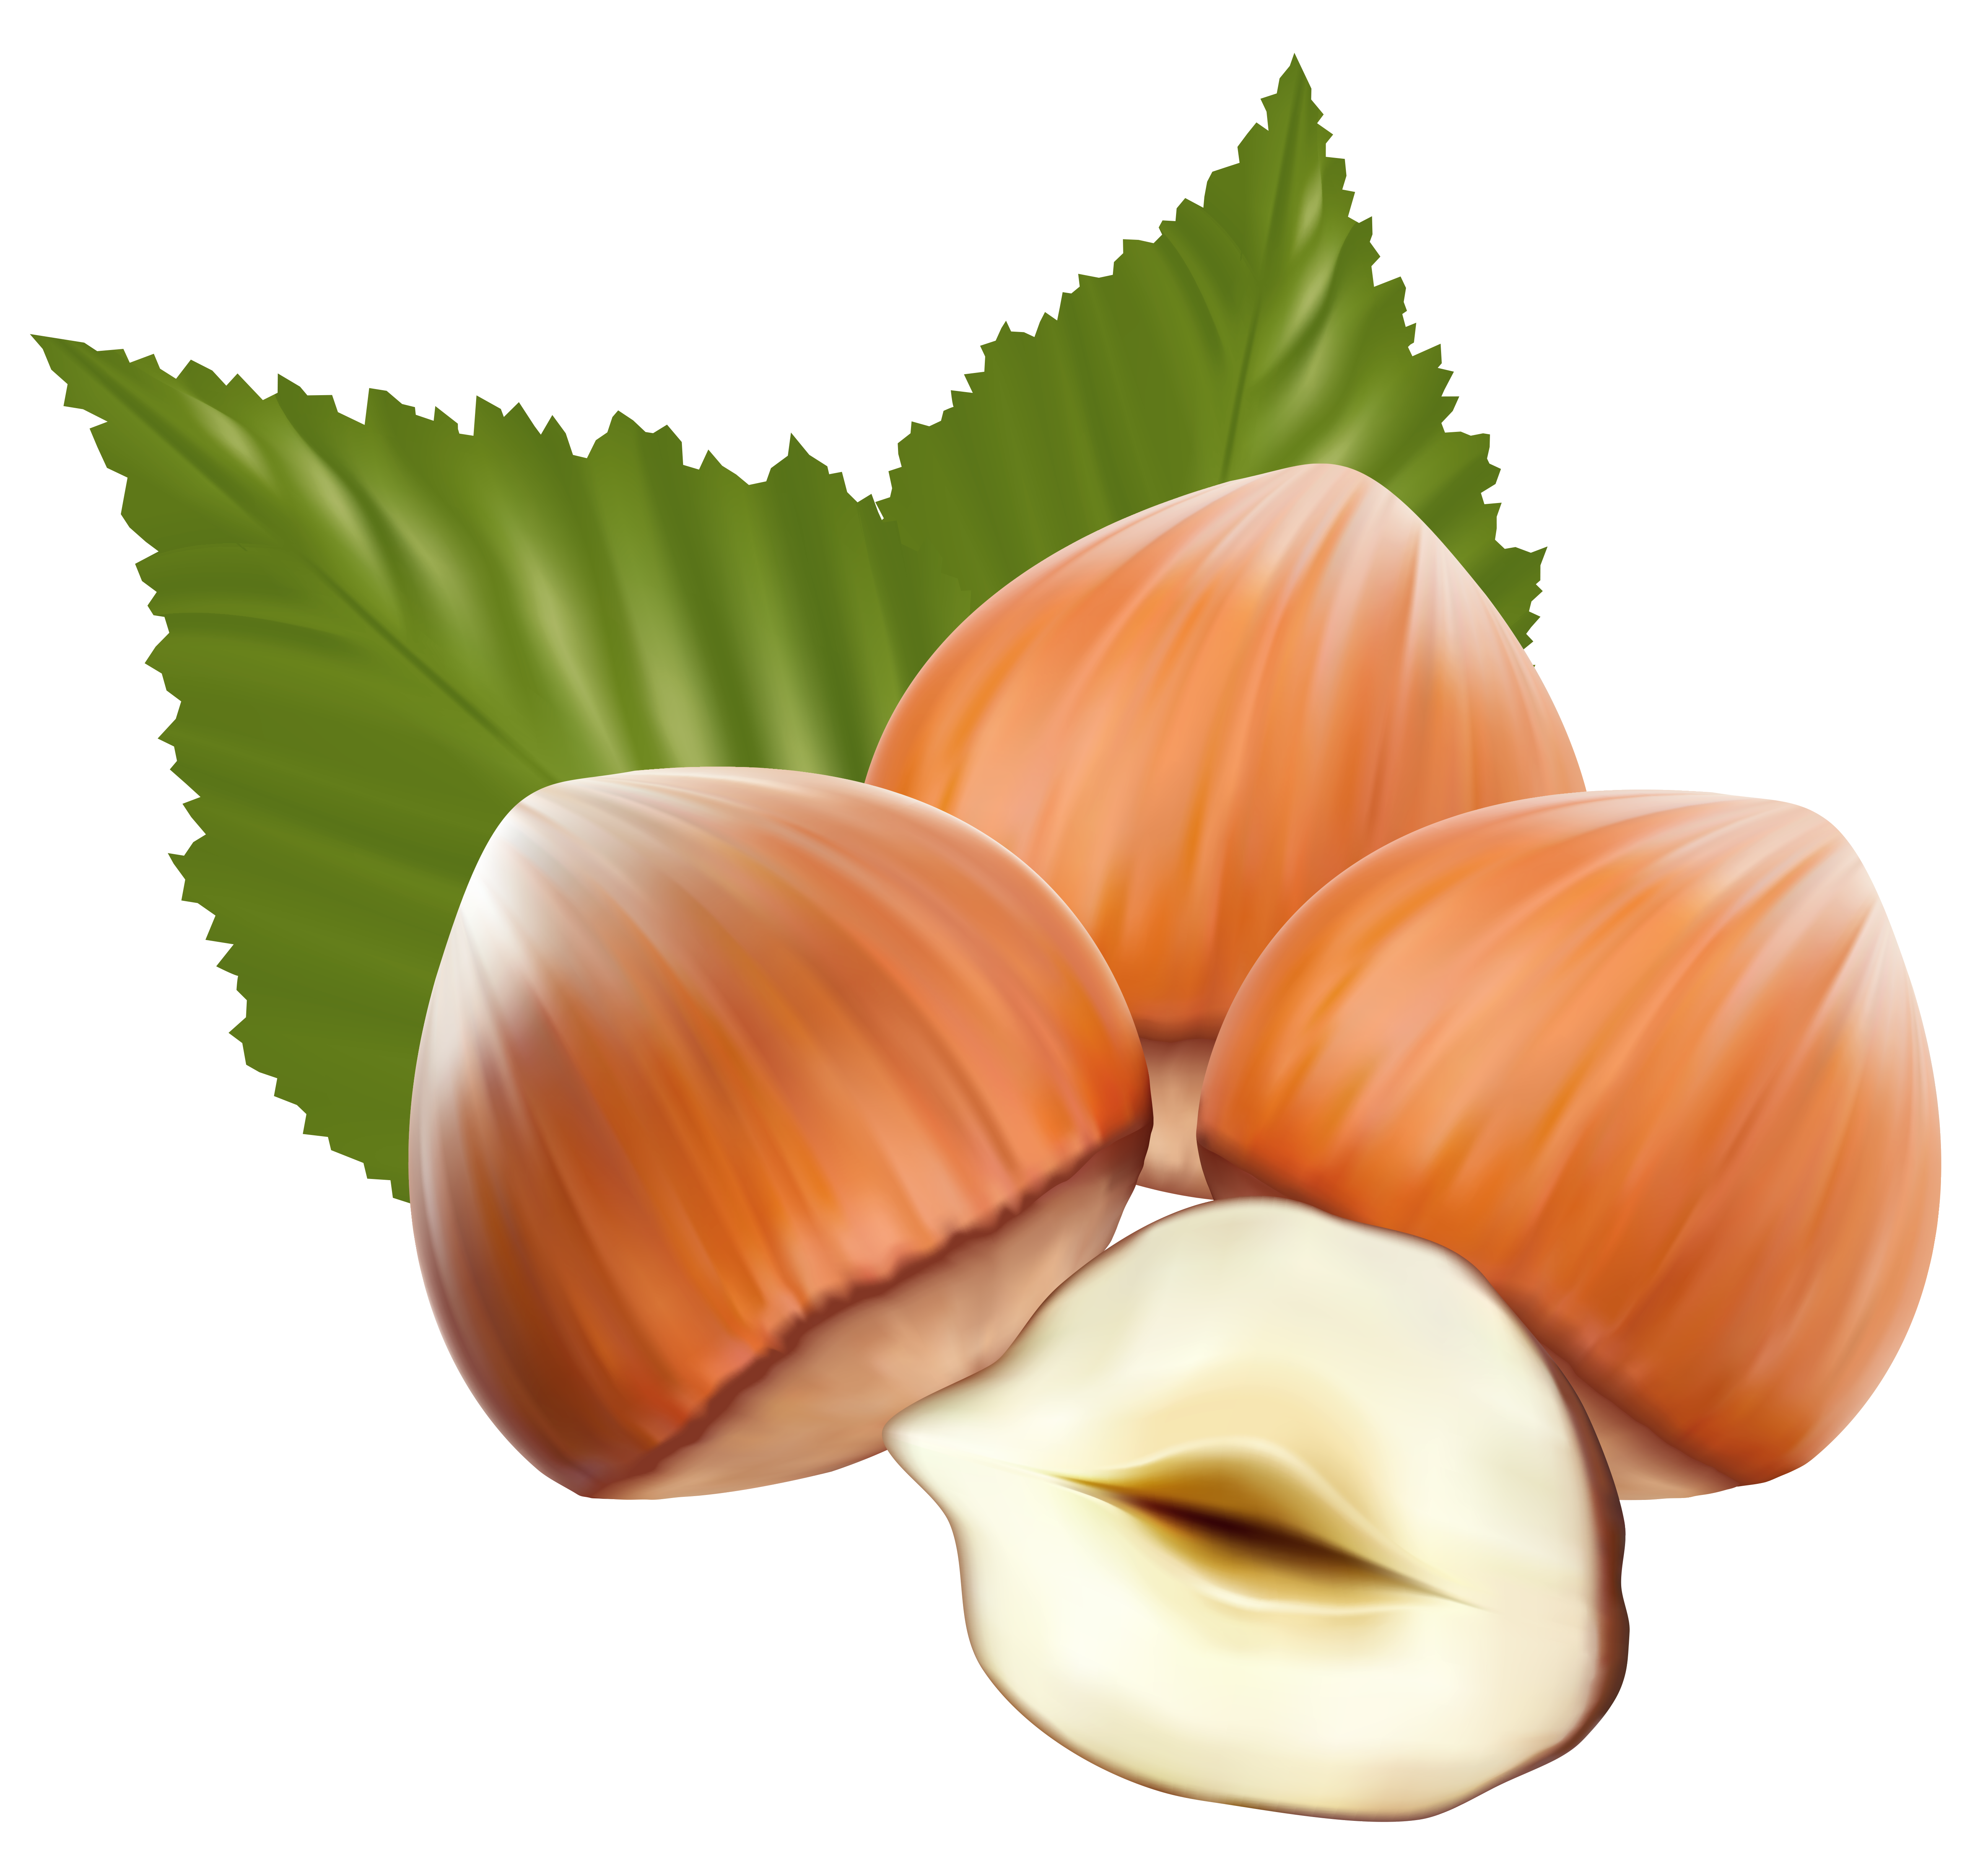 nuts clipart happy